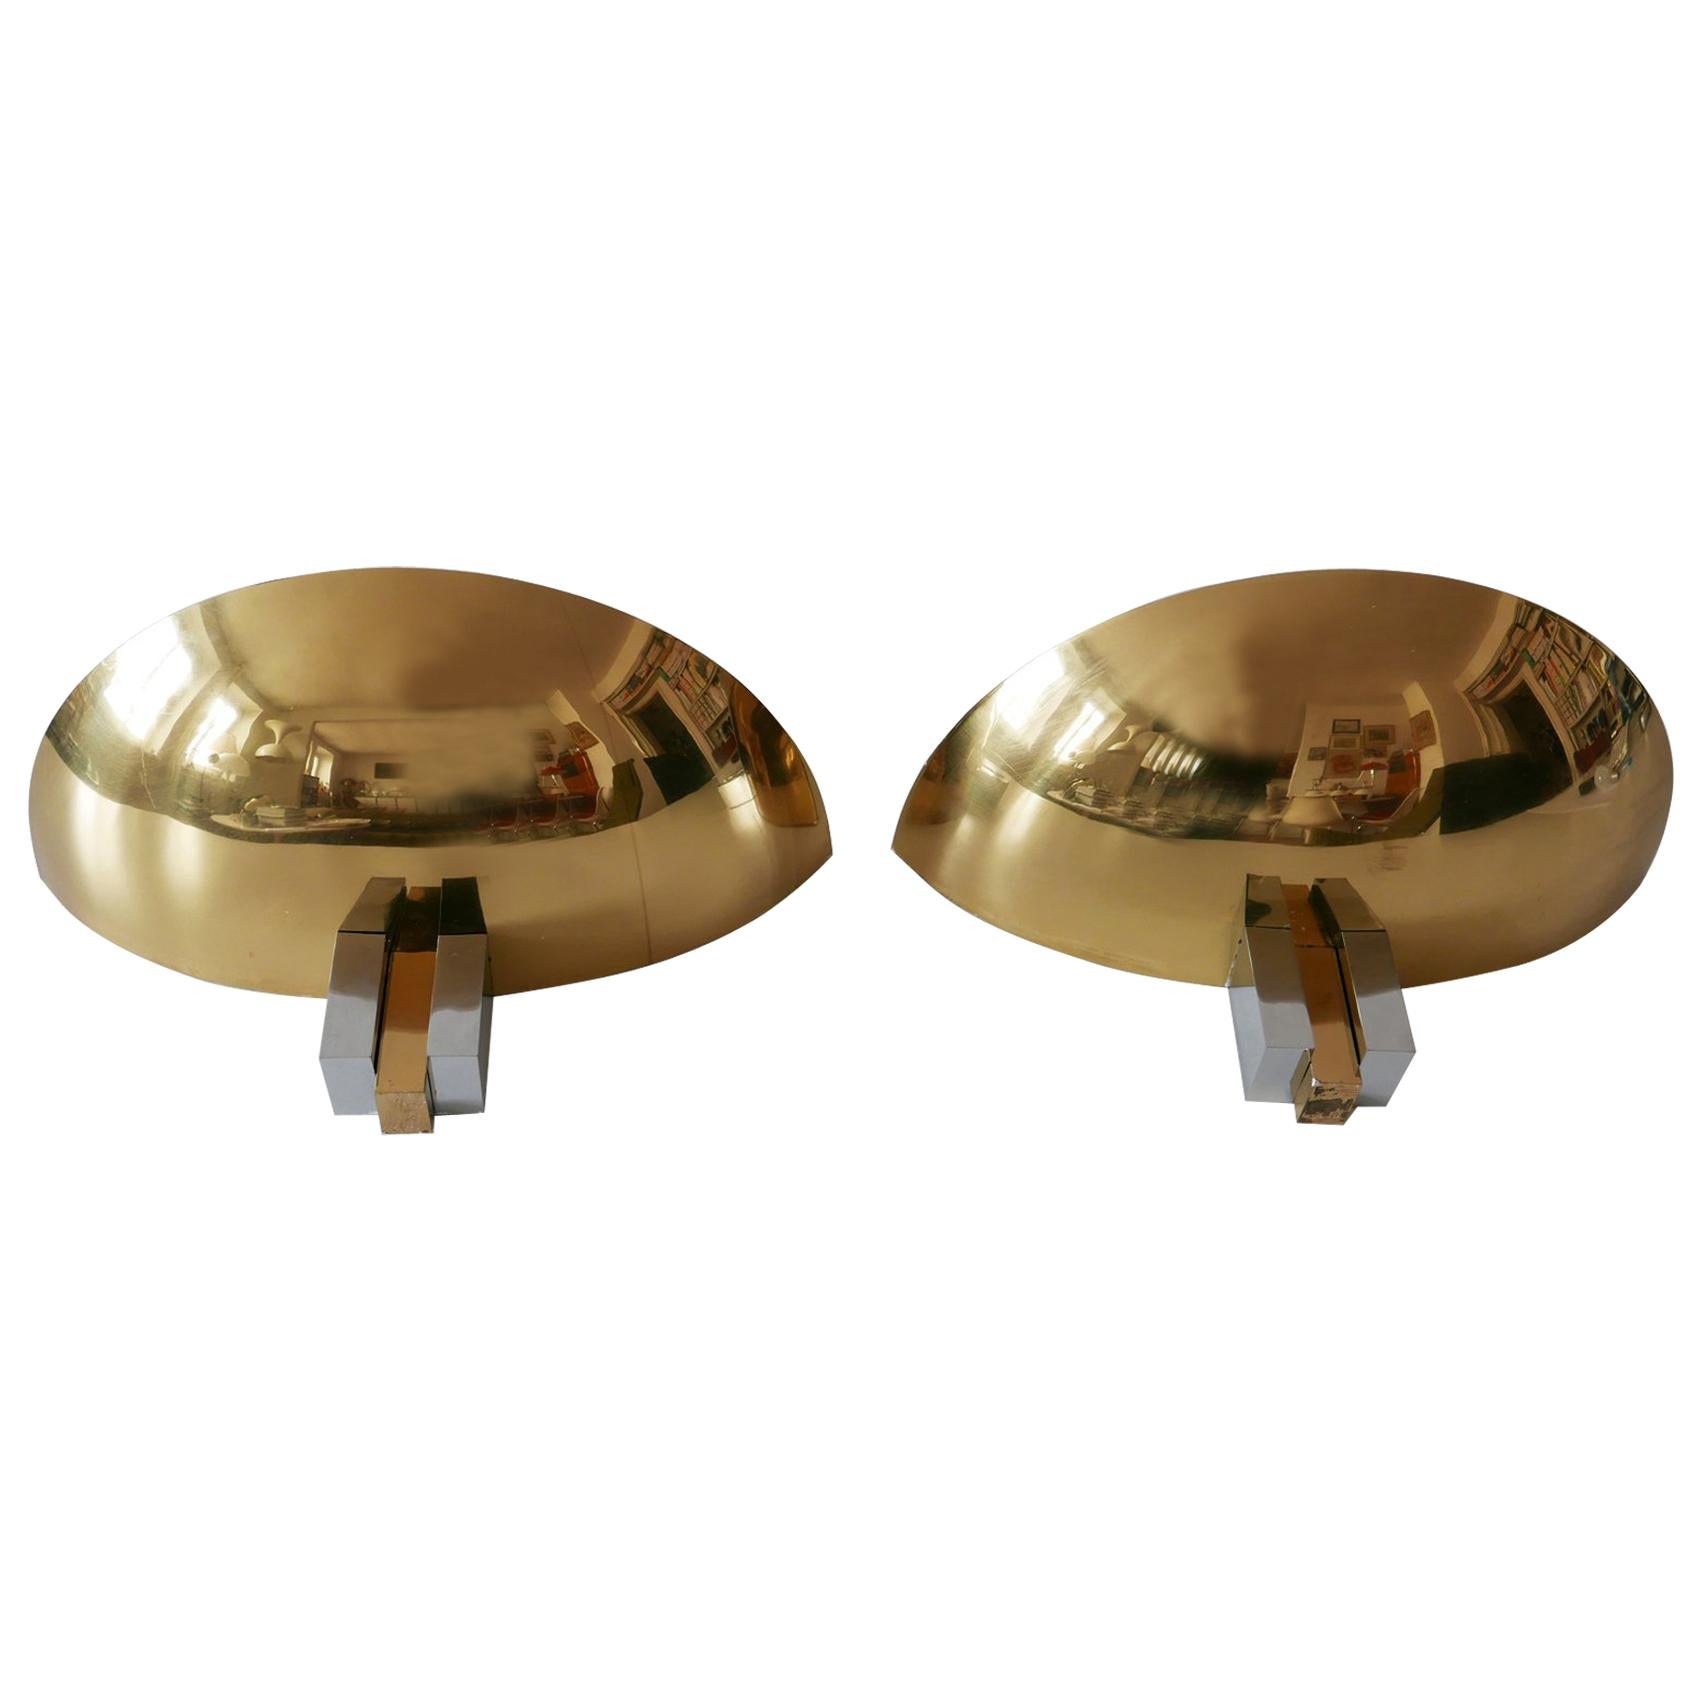 Set of Two Midcentury Brass Wall Lamps or Sconces by Art-Line, 1980s, Germany